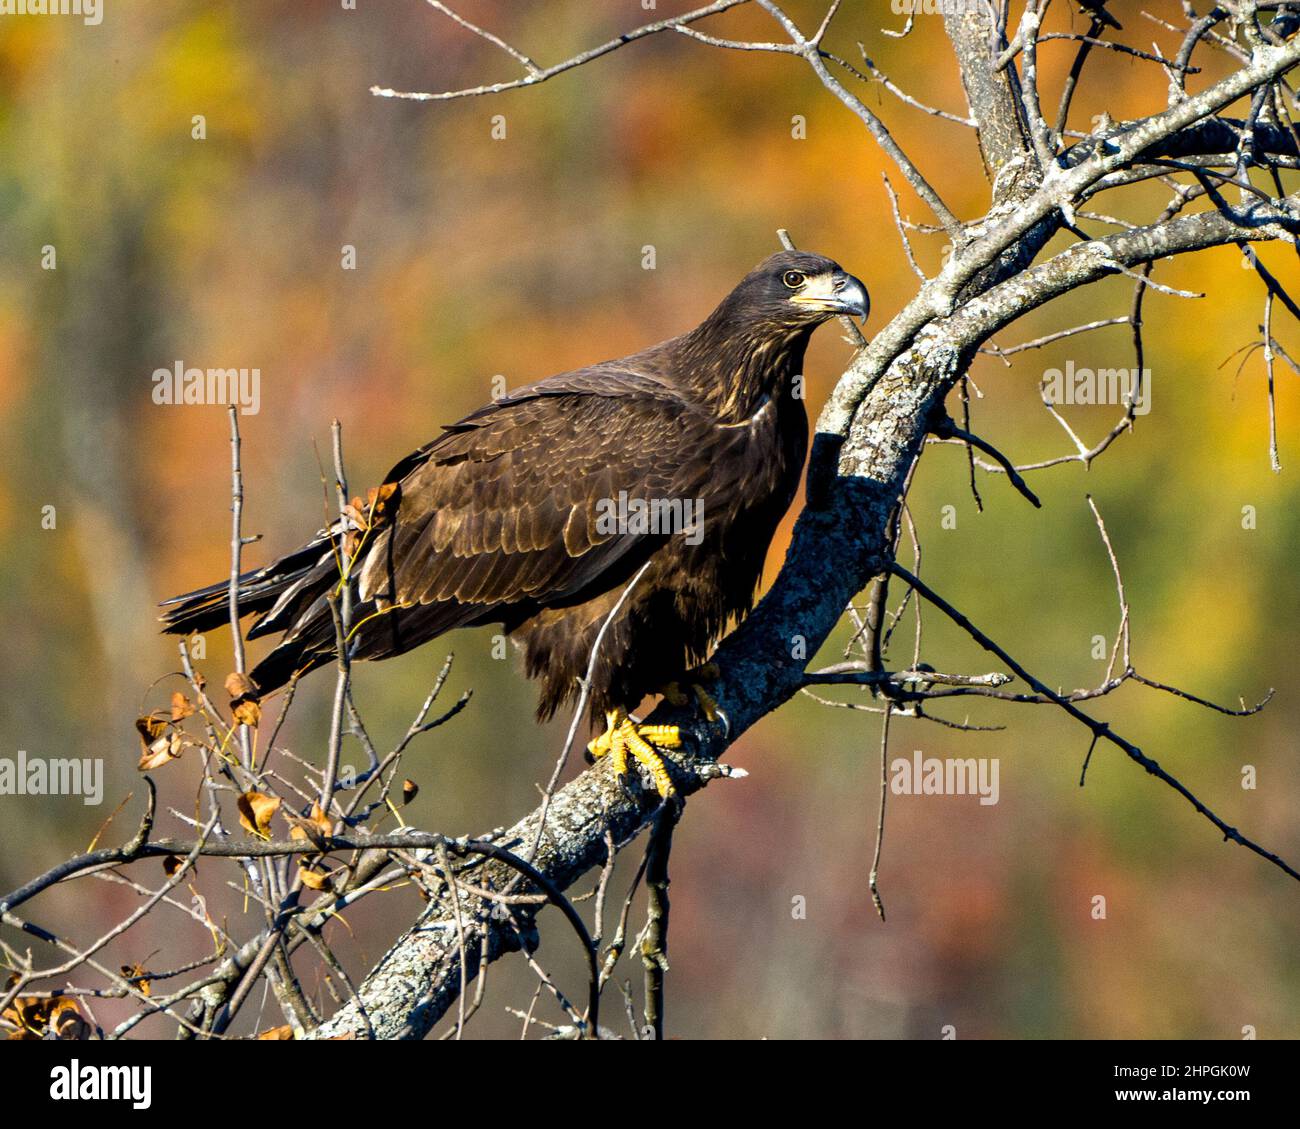 Juvenile Bald Eagle perched with a autumn blur background in its environment and habitat surrounding and displaying its dark brown plumage. Eagle. Stock Photo